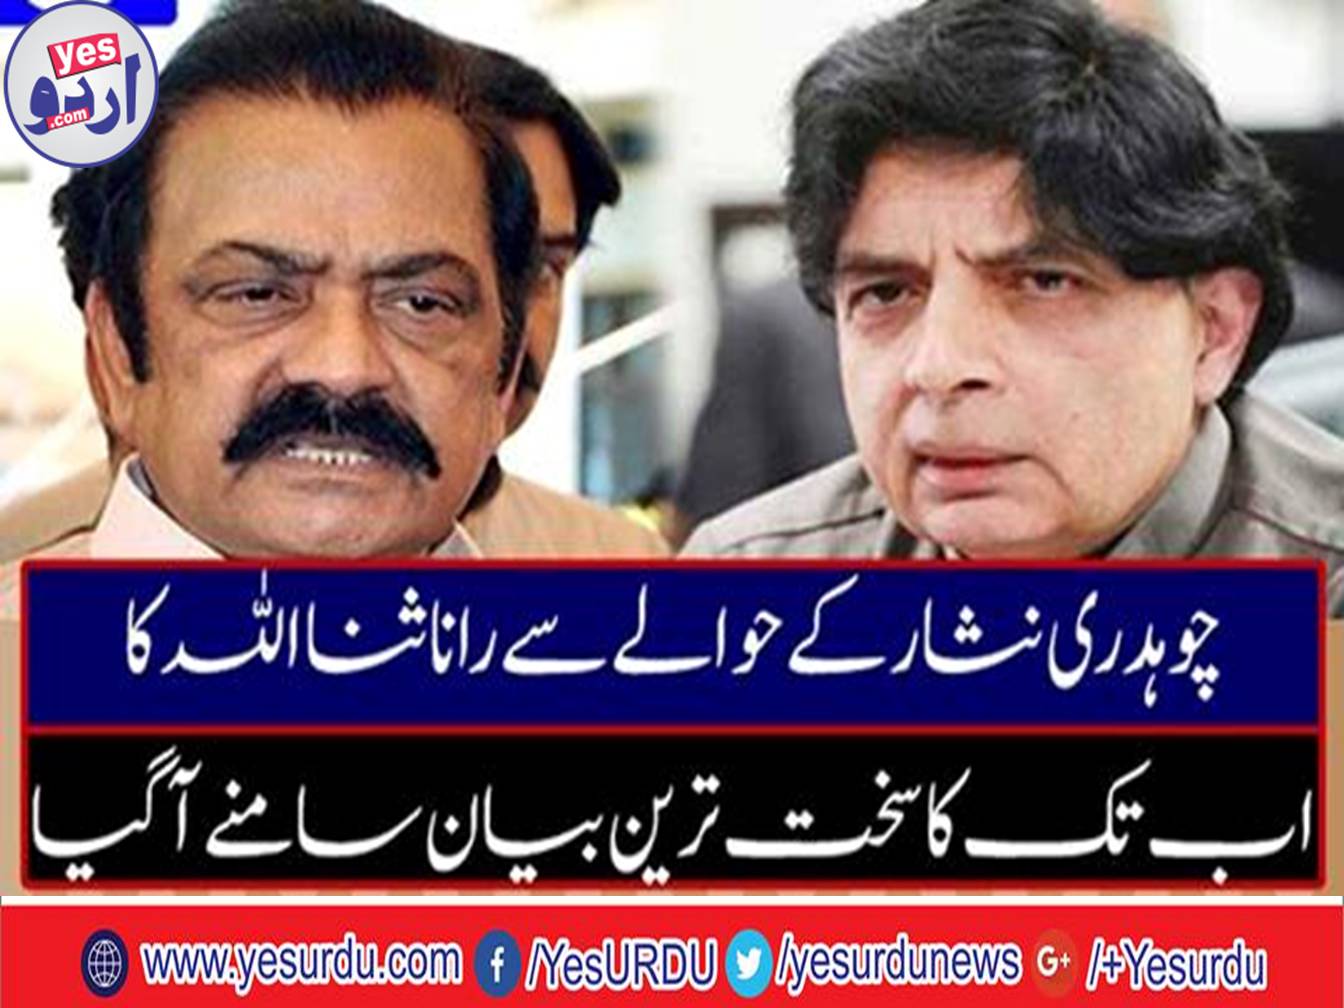 Chaudhry Nisar's height reduced with his words, Rana Sanaullah